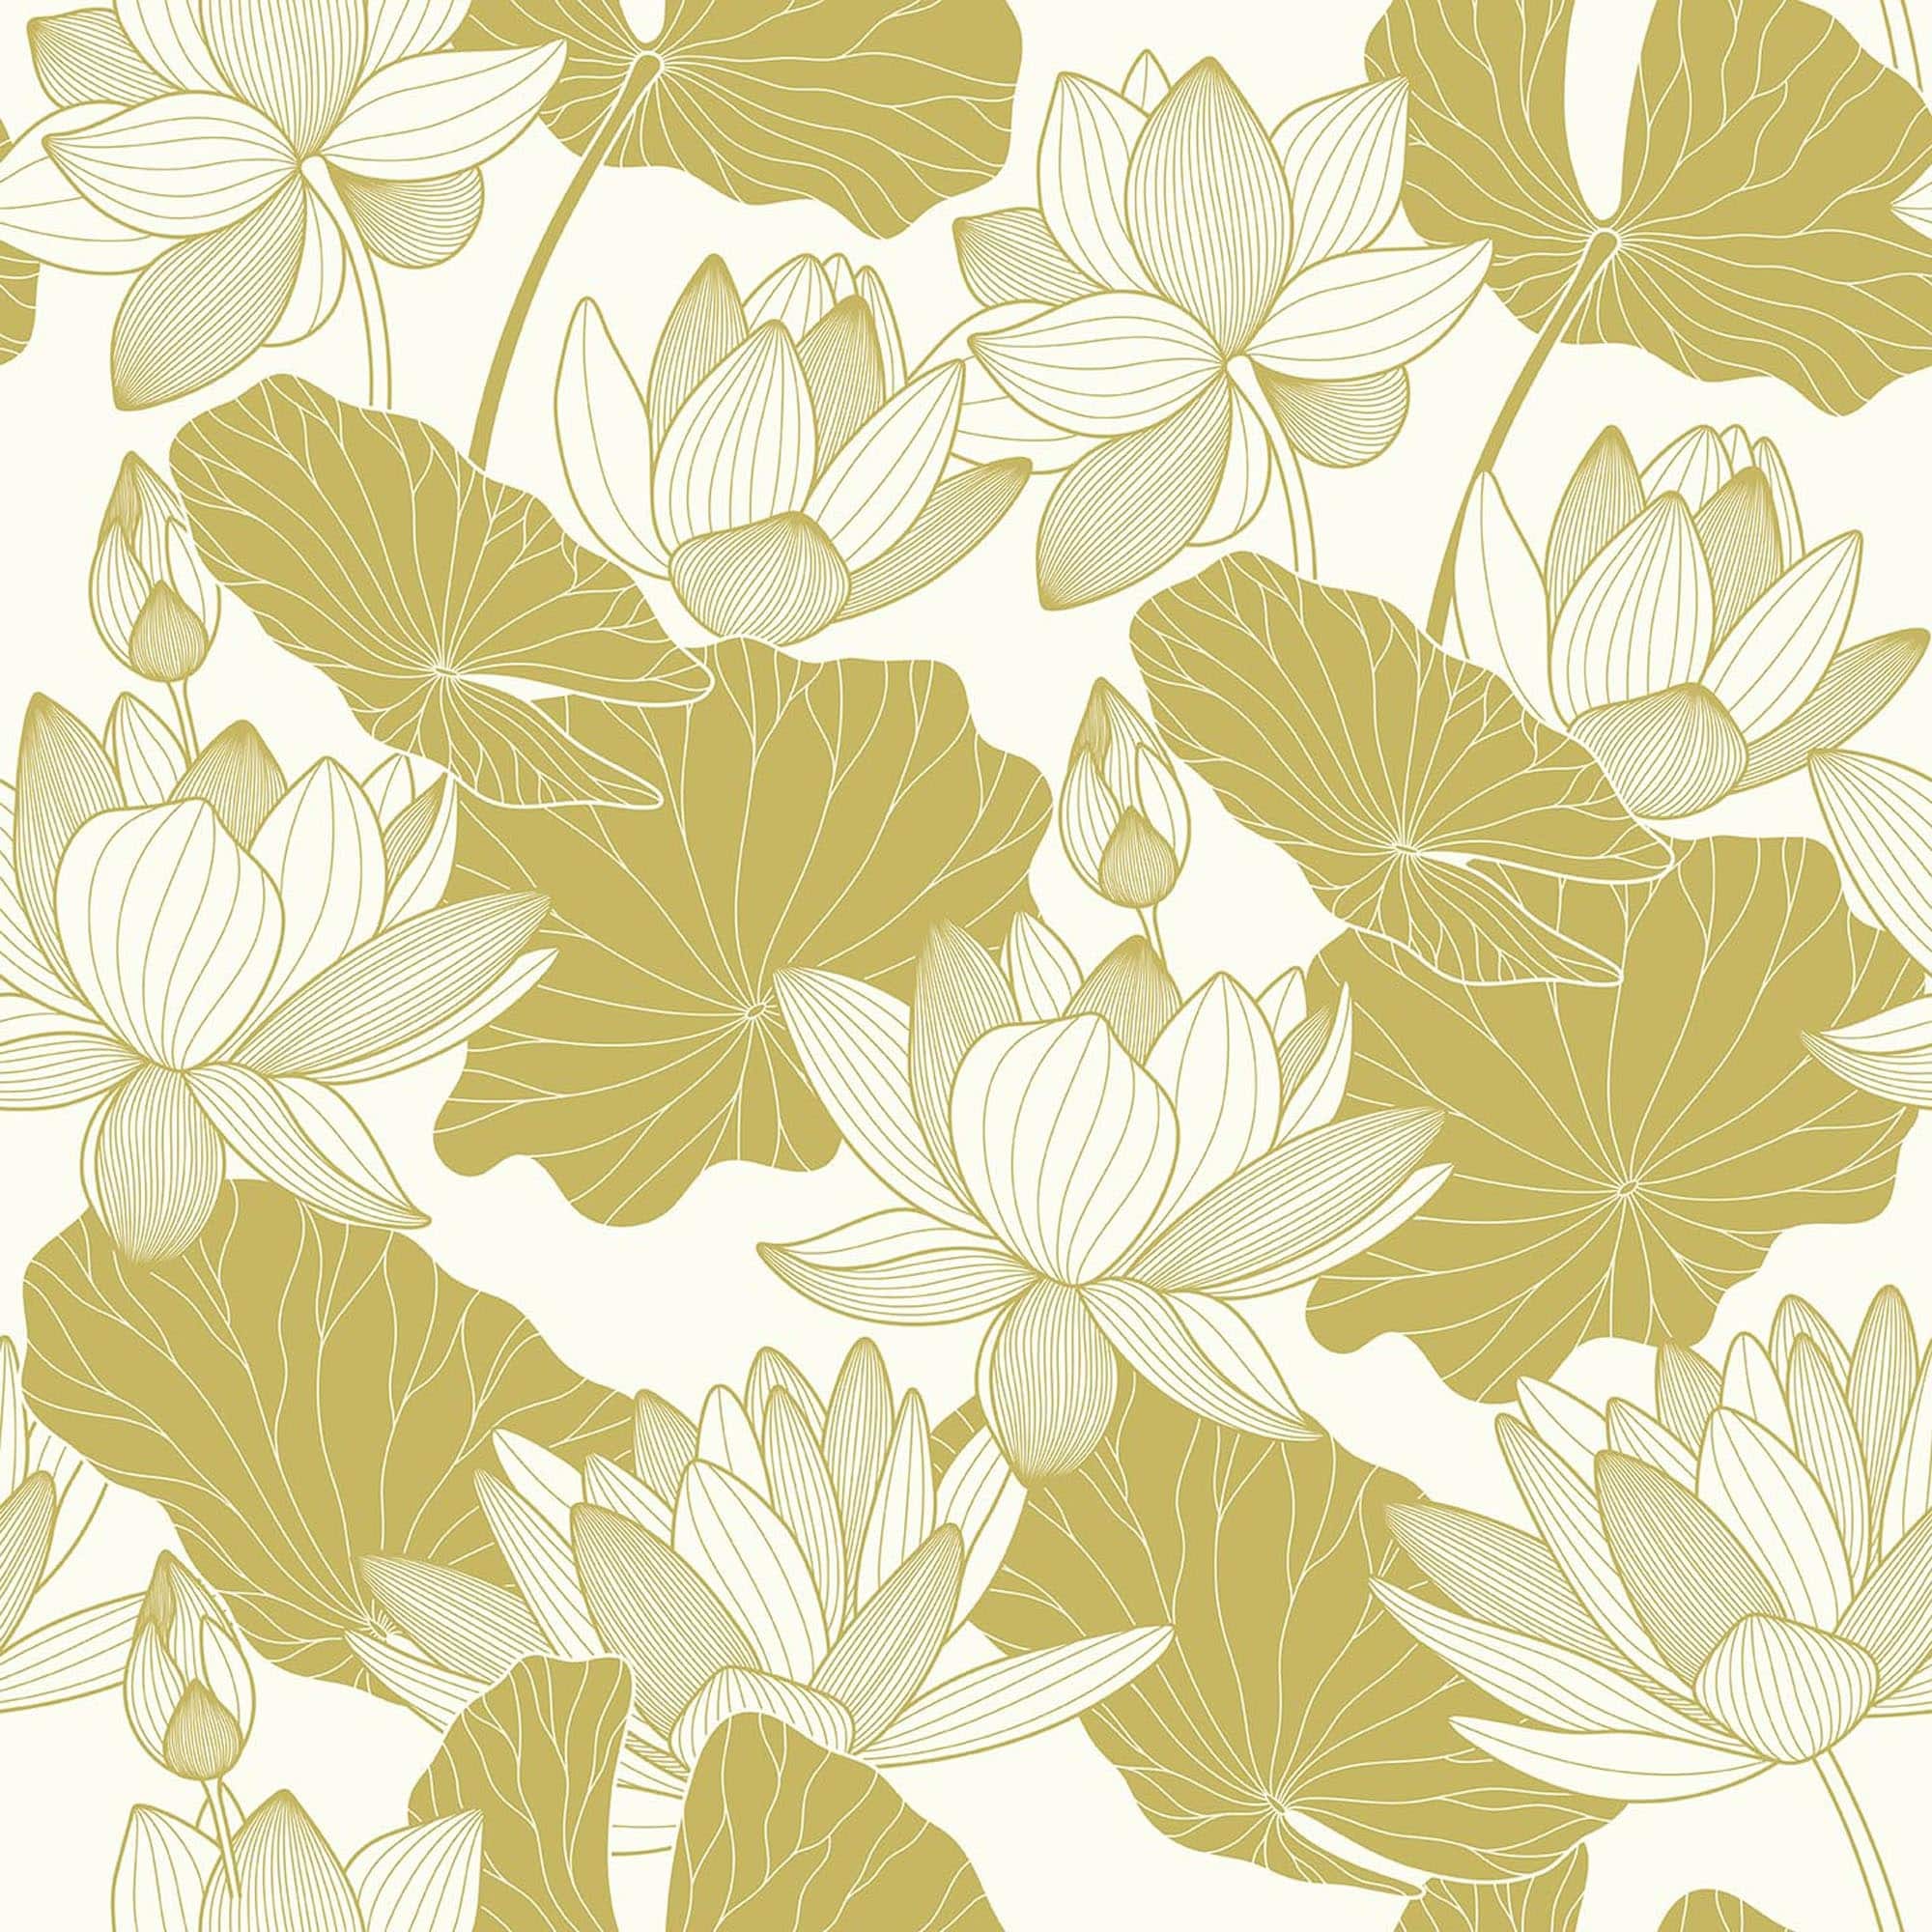 Lotus flower wallpaper - Peel and Stick or Non-Pasted